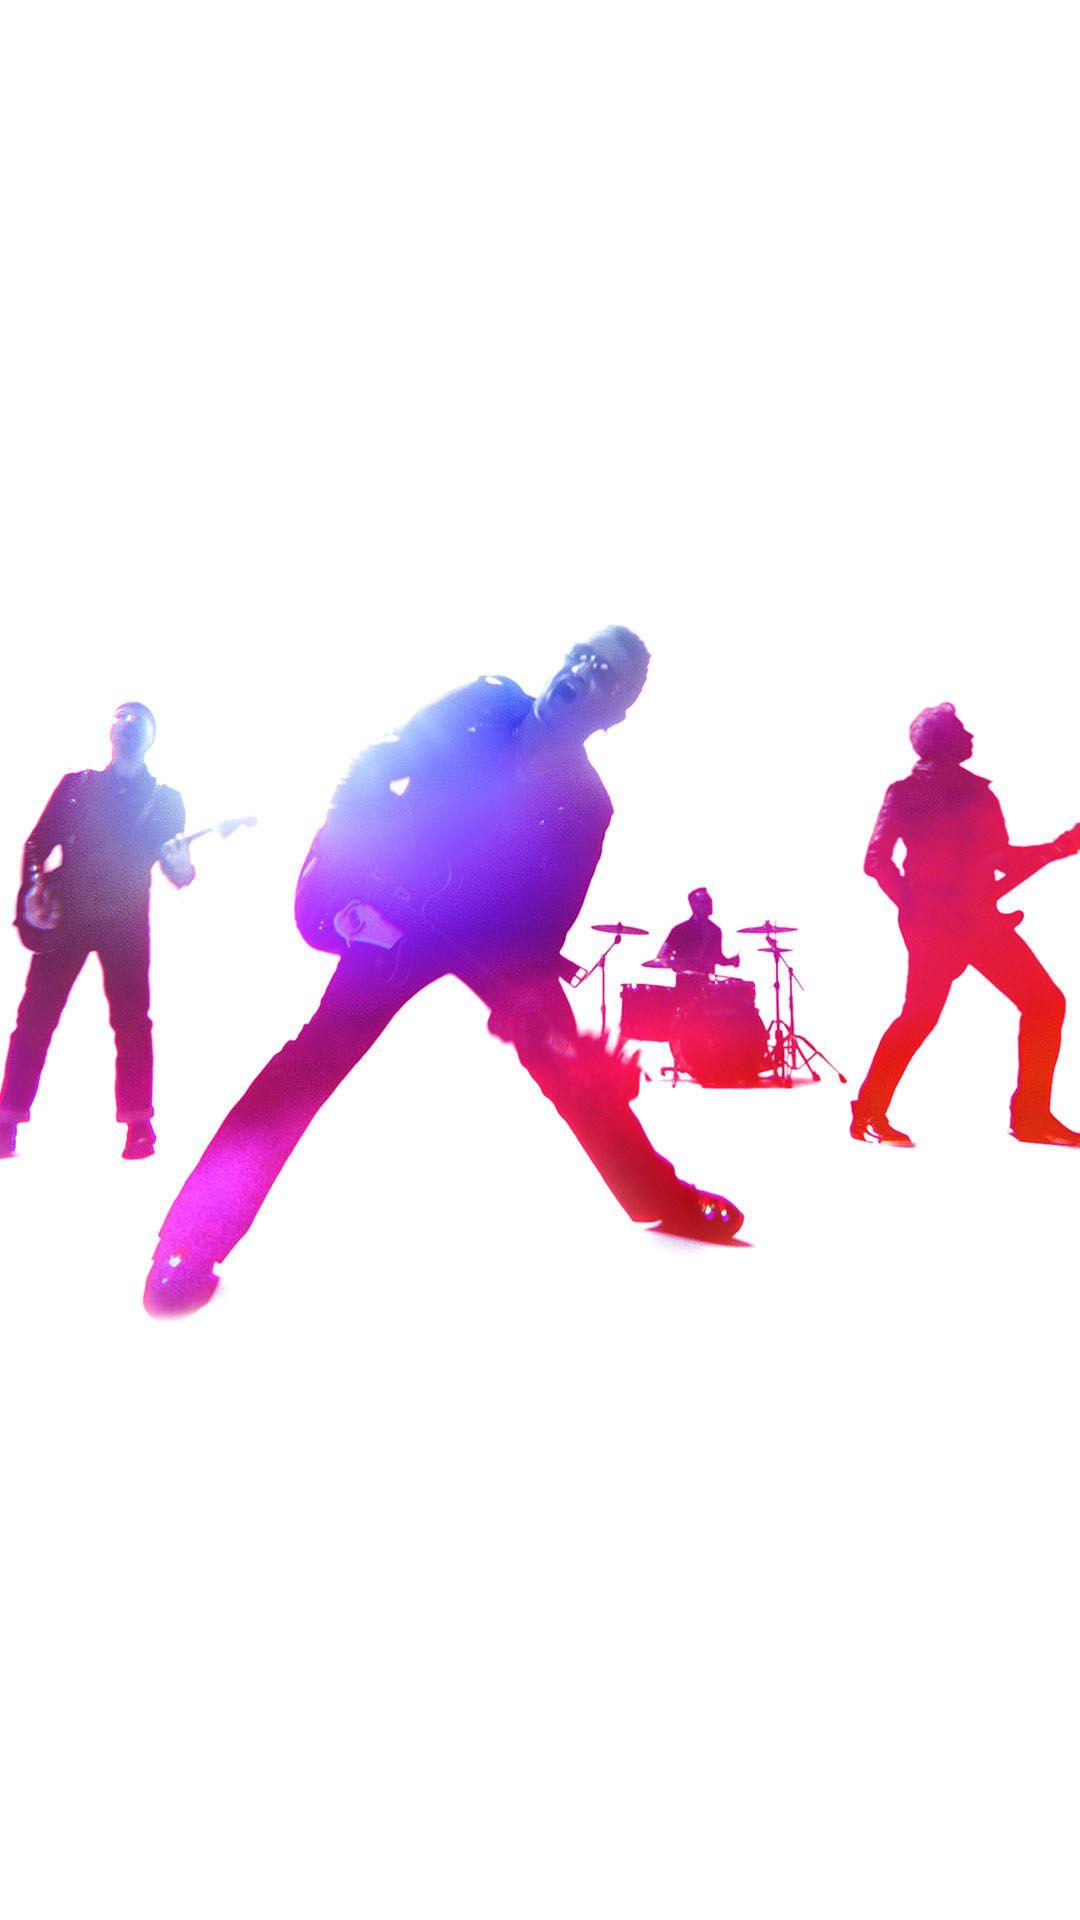 U2 Band Colorful Concert Android Wallpapers free download